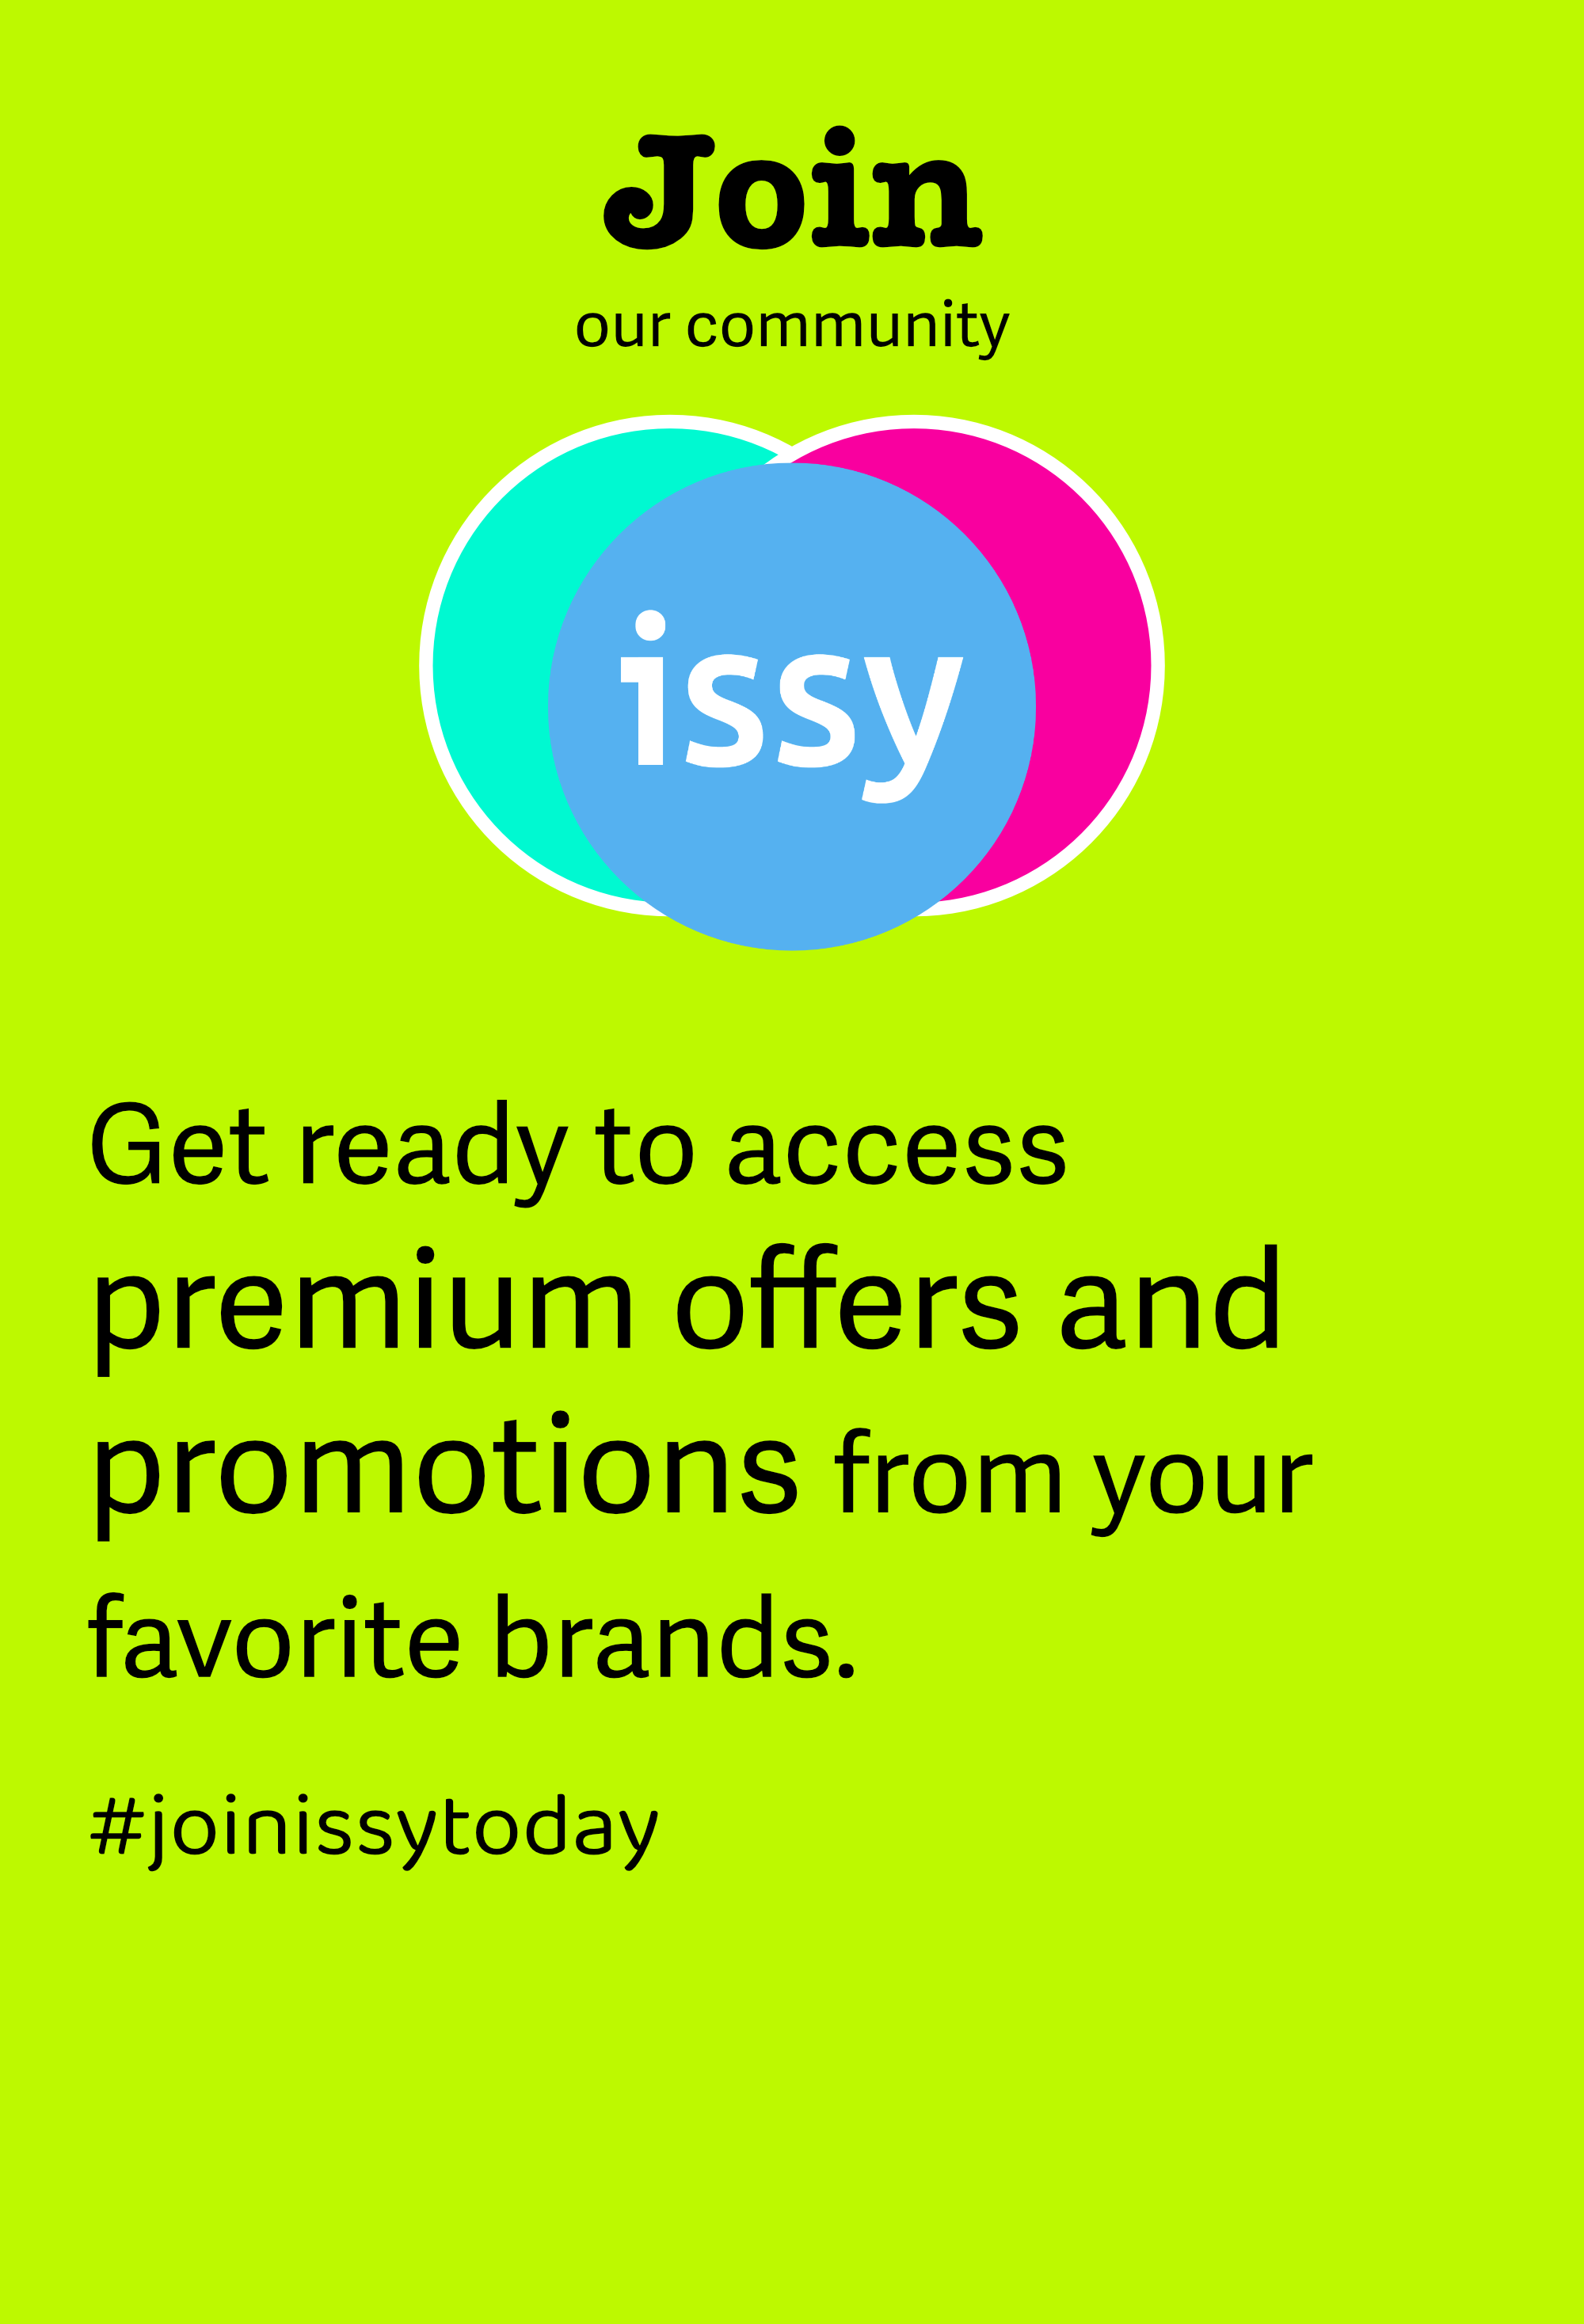 Join issy